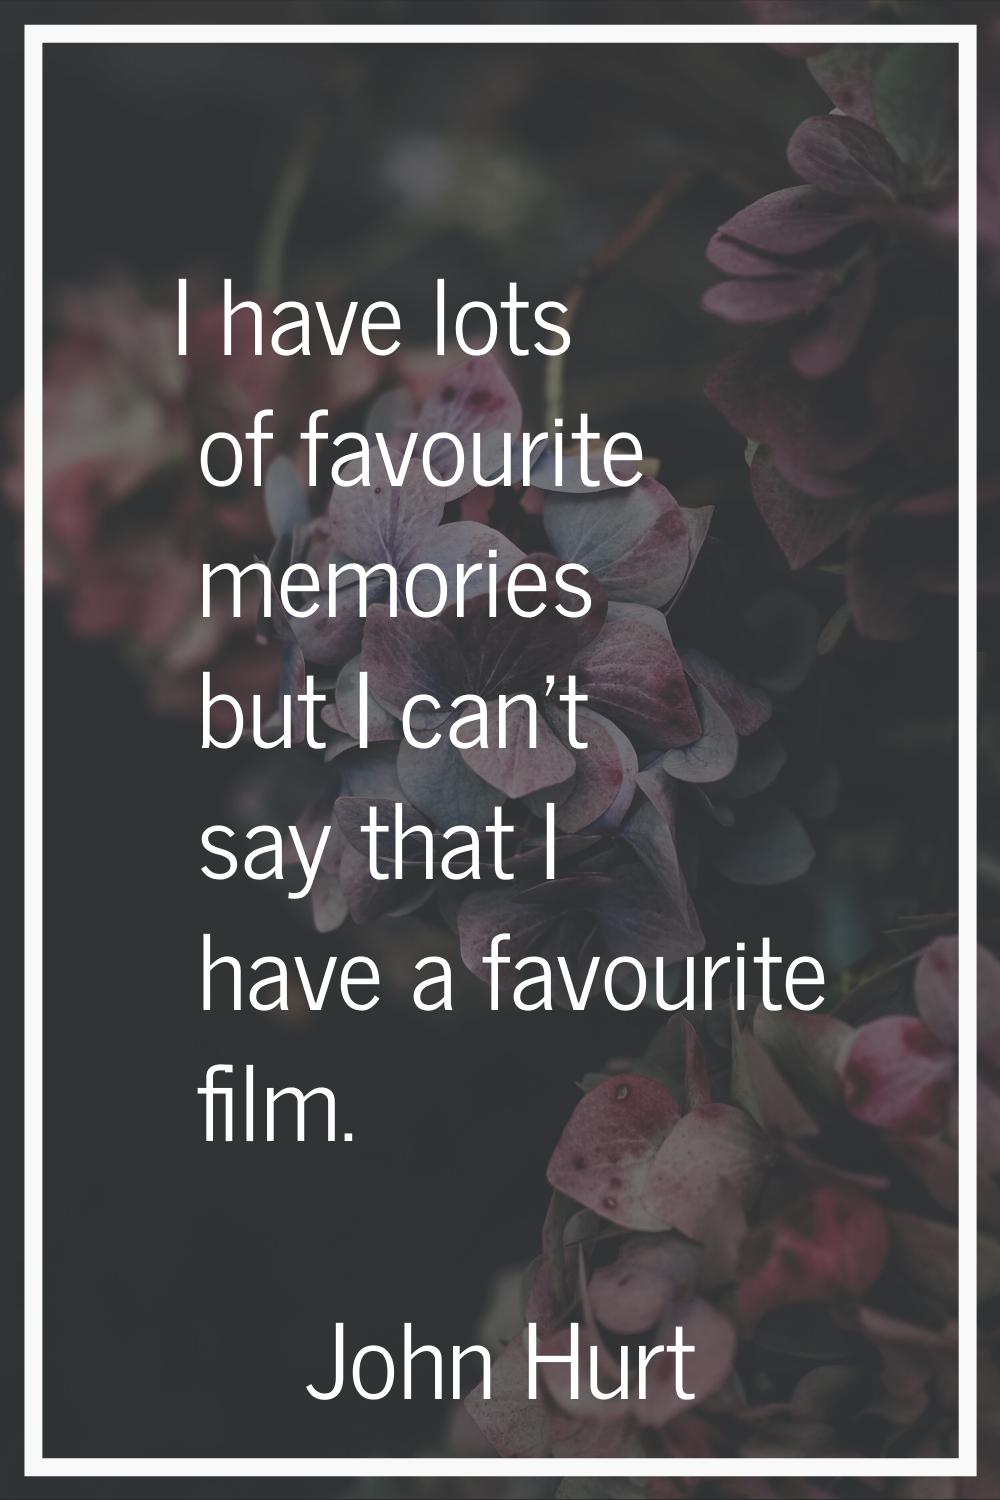 I have lots of favourite memories but I can't say that I have a favourite film.